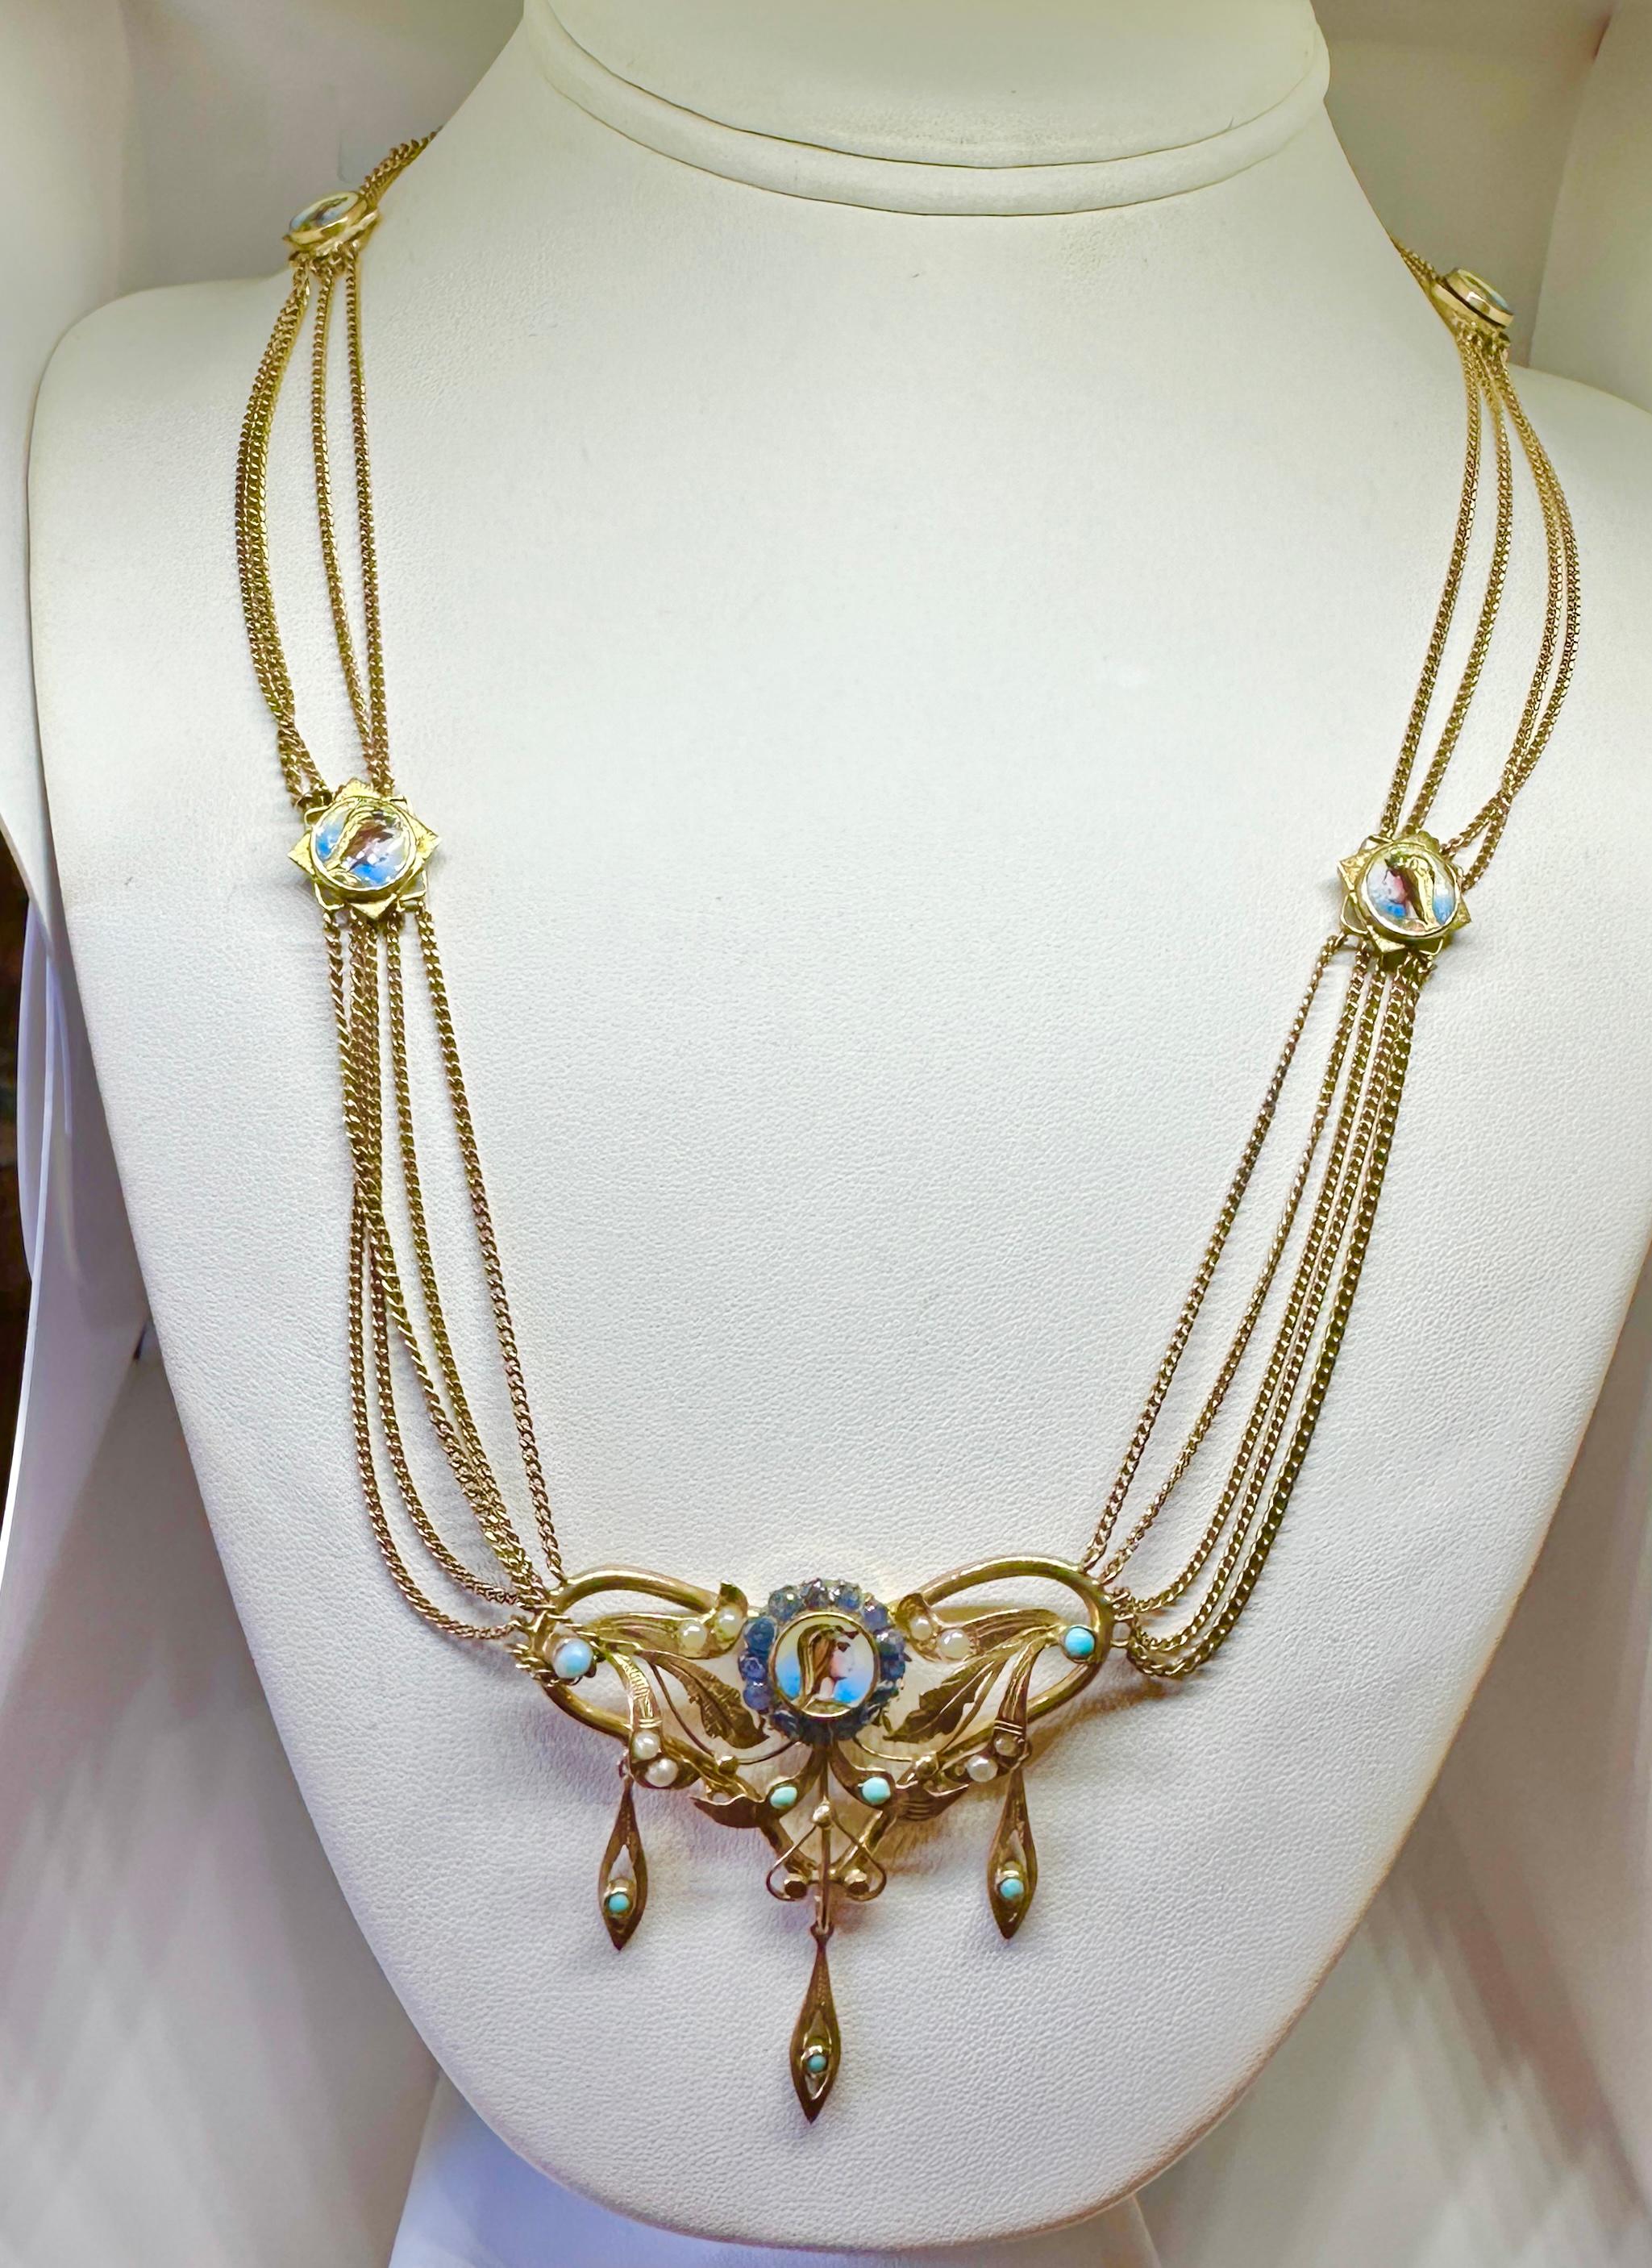 This is a very rare antique museum quality Egyptian Revival Necklace in Gold with Sapphires, Turquoise and Pearls with magnificent enamel work depicting images of the Pharoah or Goddess, or Nefertiti or Cleopatra.  The elegant four strand festoon